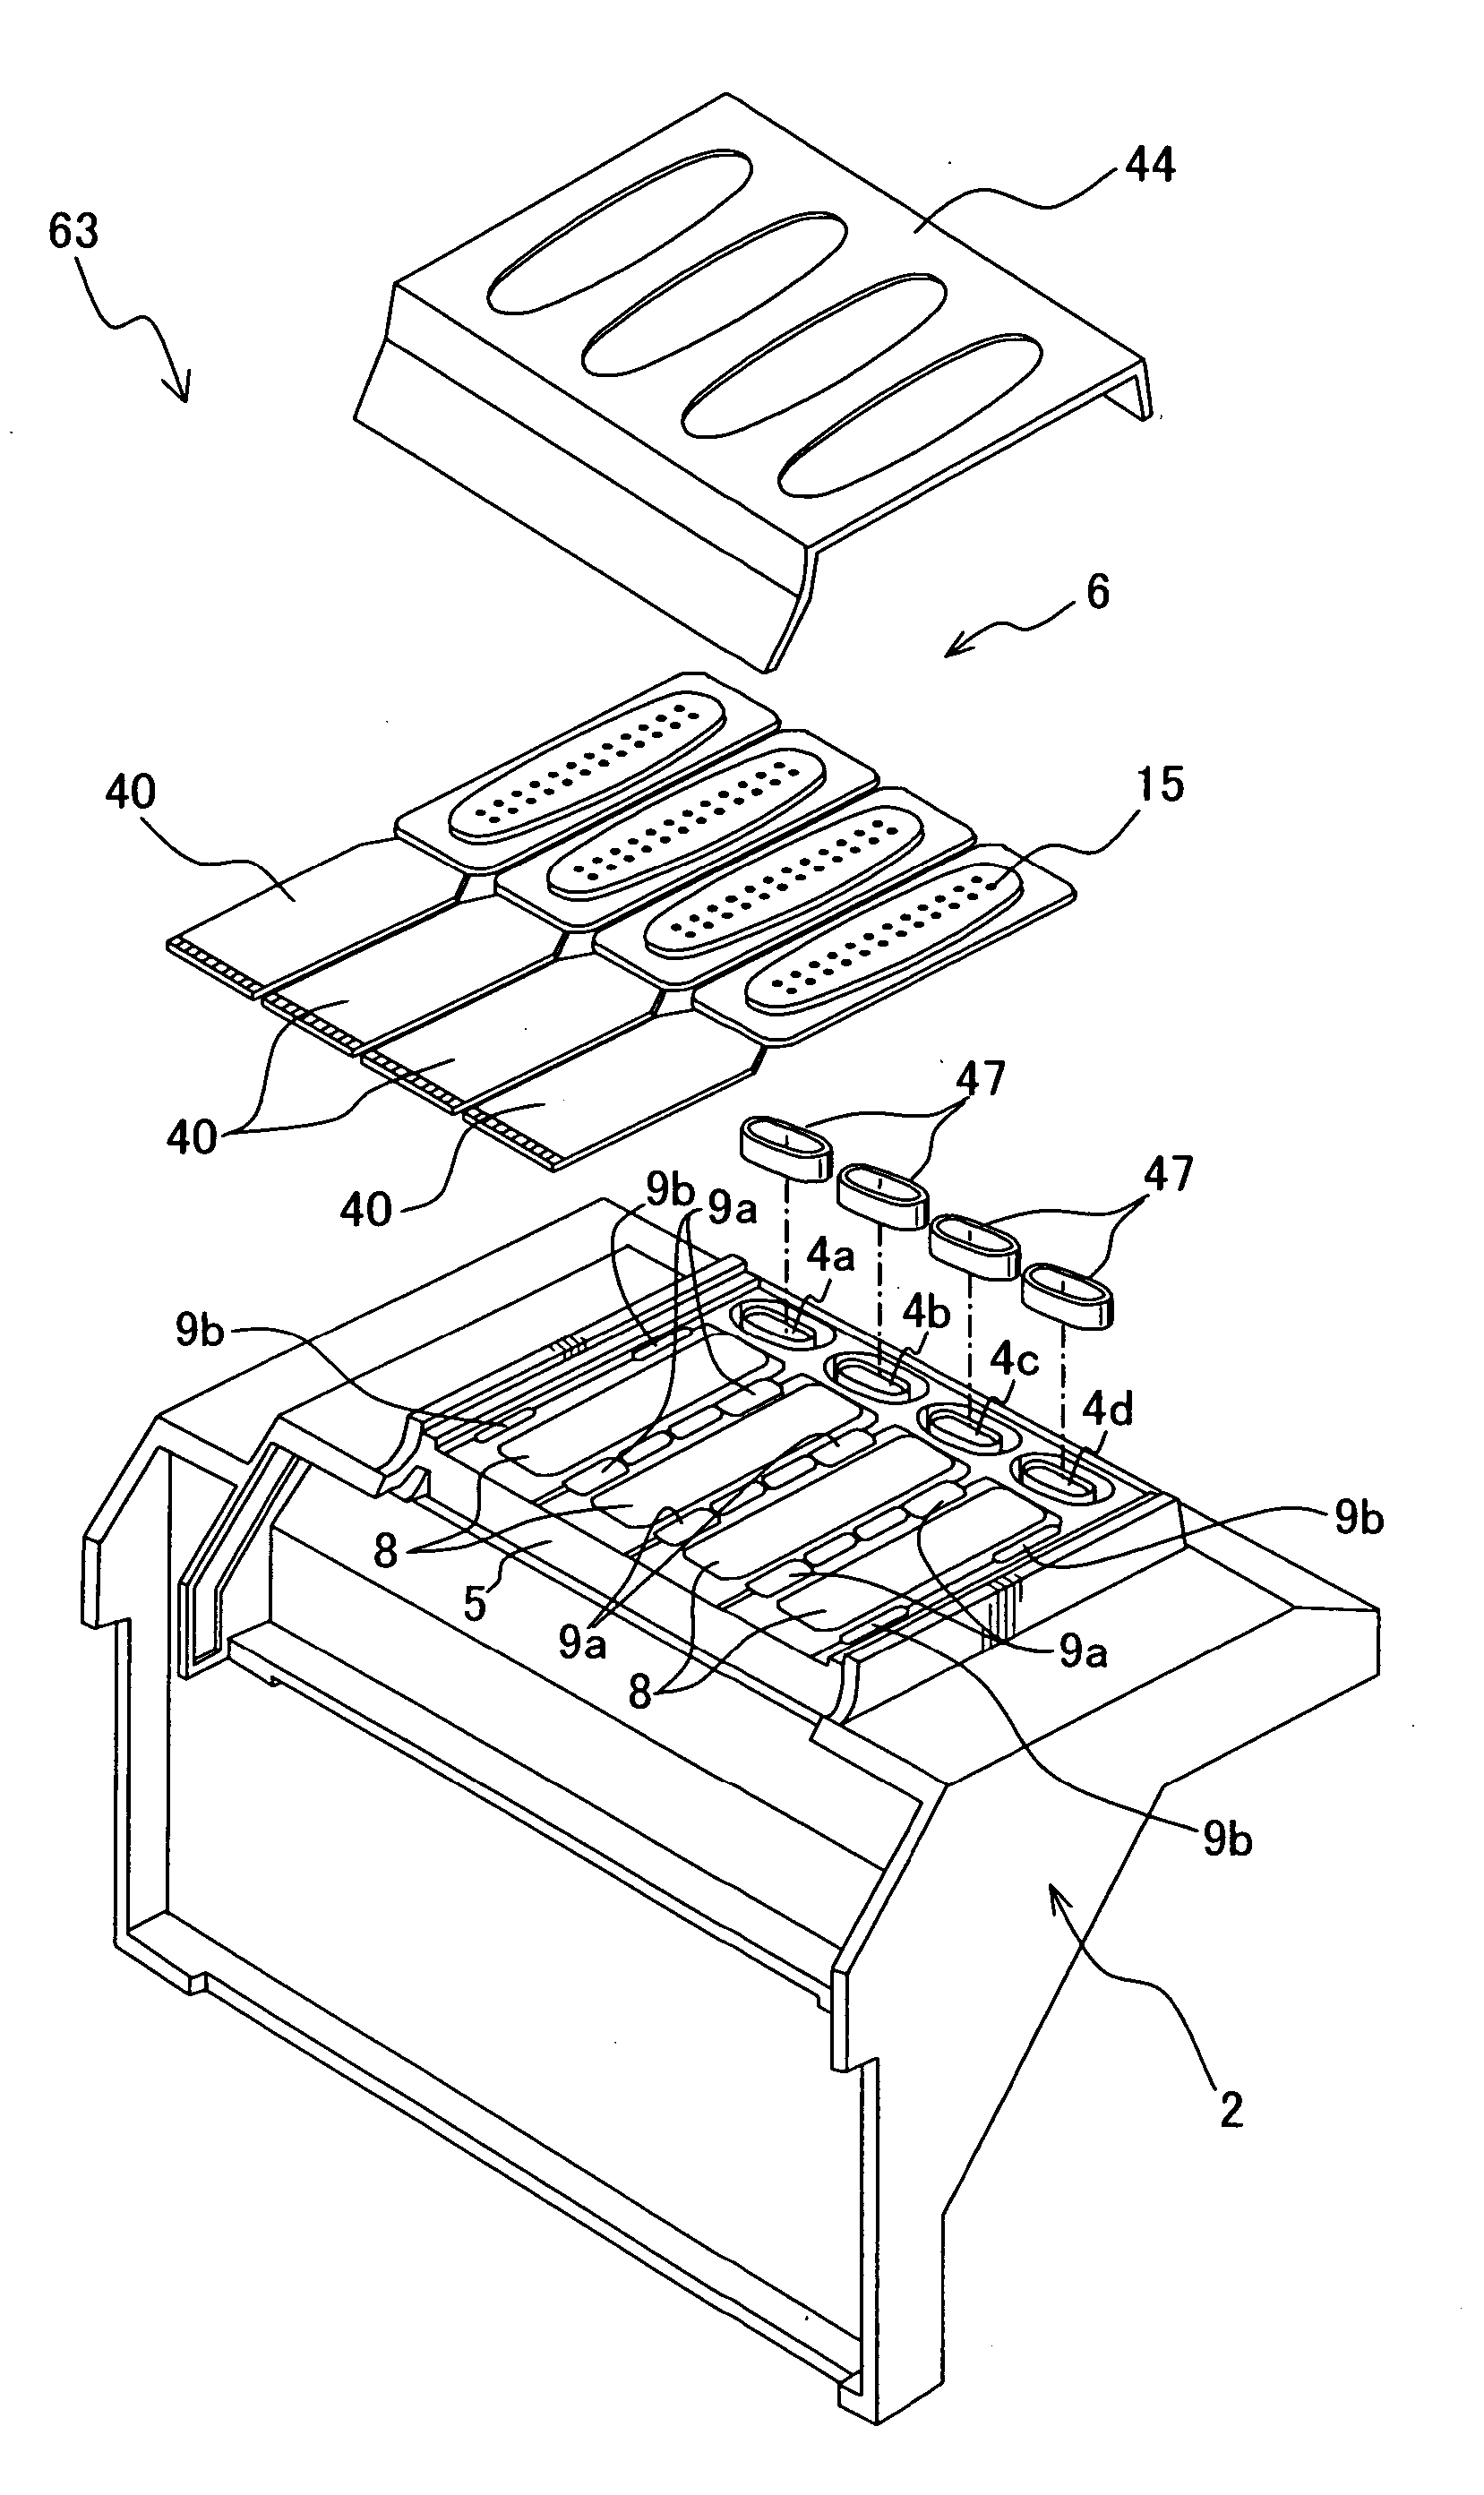 Method for selecting material forming ink channel in ink-jet recording apparatus